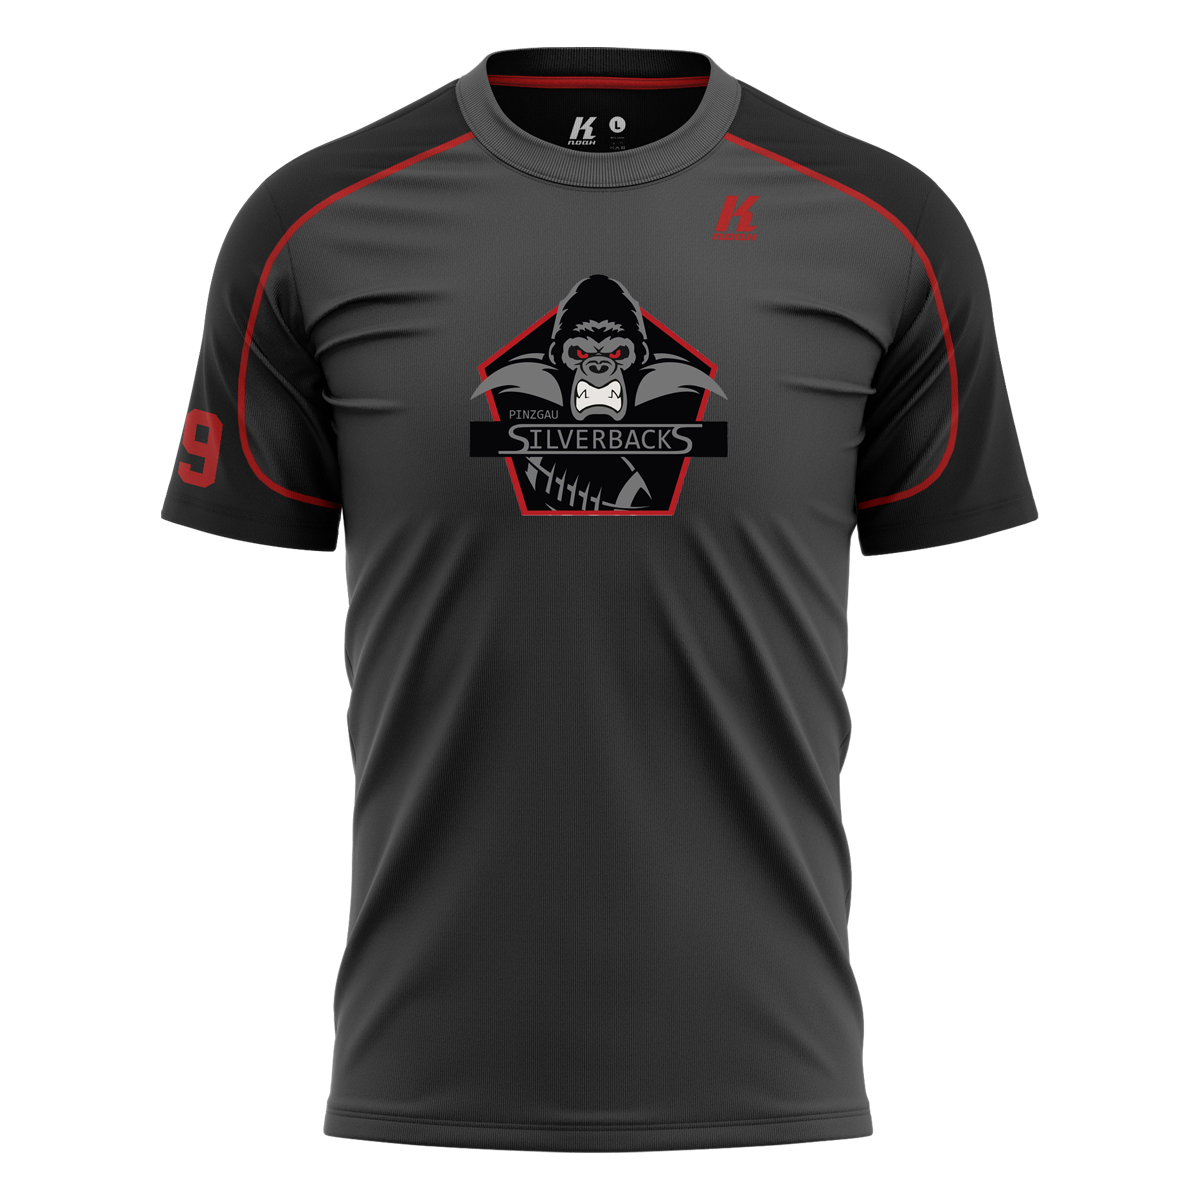 Silverbacks Signature Series Tee "Calgary" with Playernumber or Initials